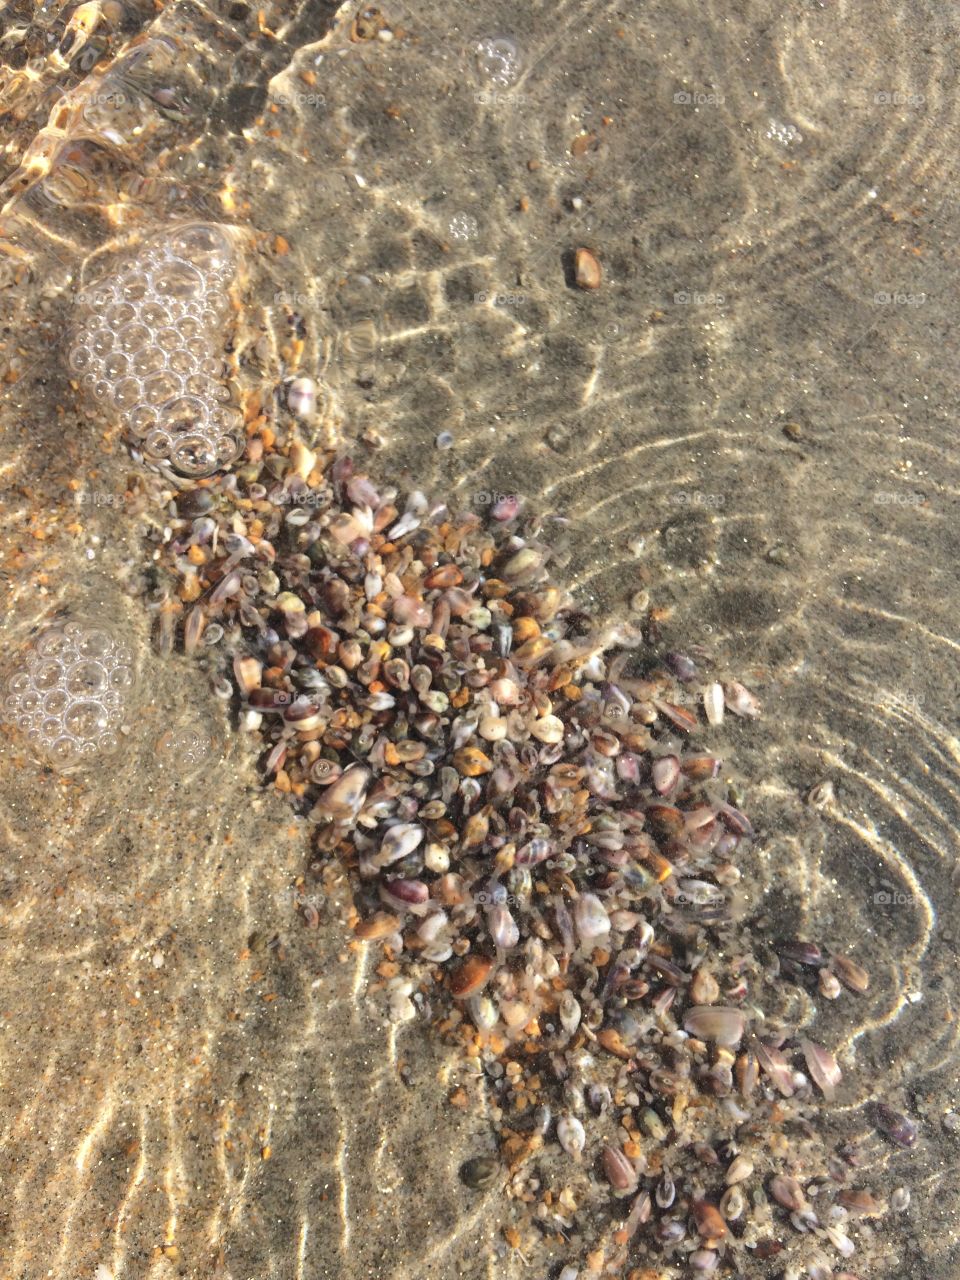 Gentle ocean ripples catch the sunlight overlaying a natural collection of sea pebbles nestled in the sand.